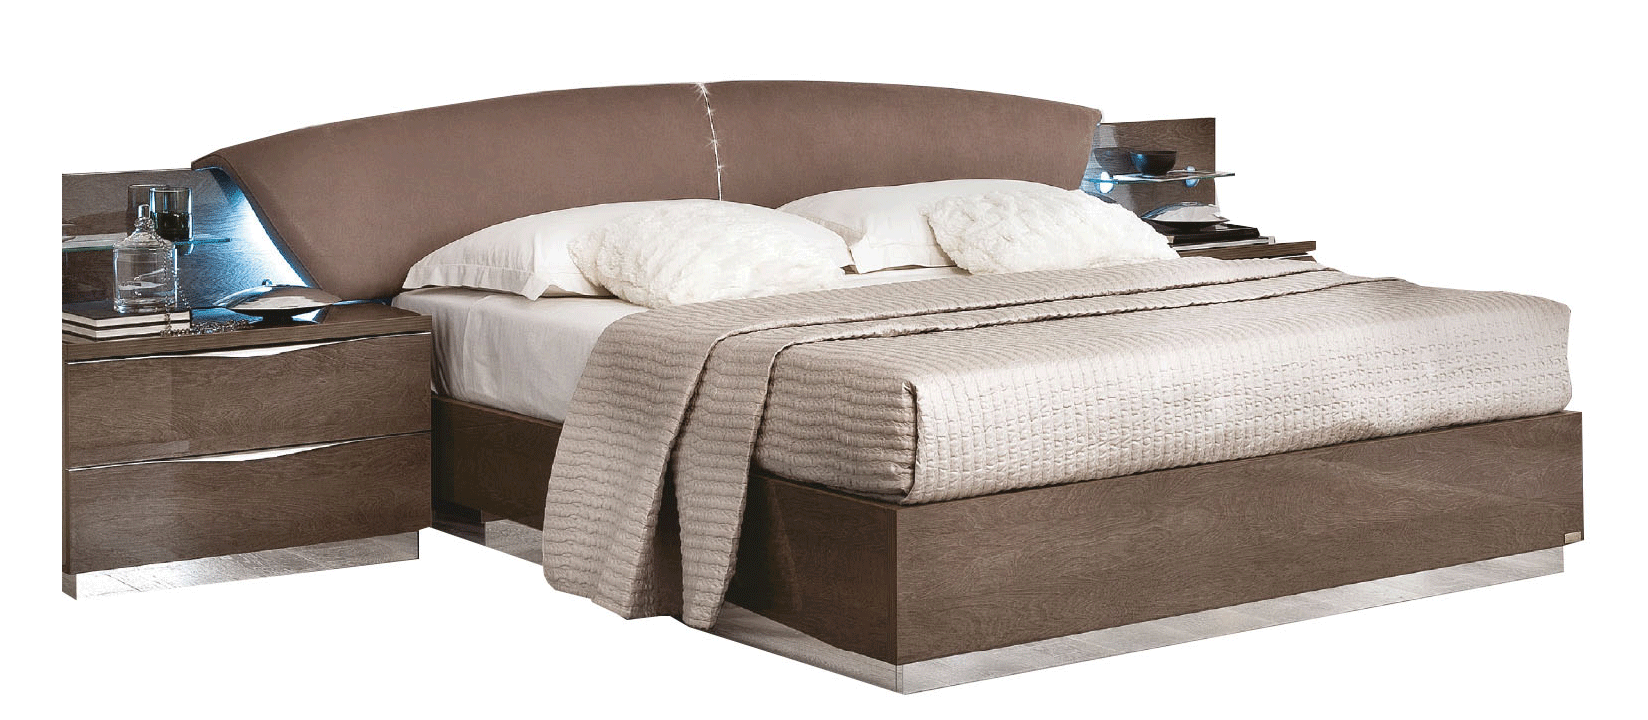 Brands Camel Gold Collection, Italy Platinum DROP Bed SILVER BIRCH